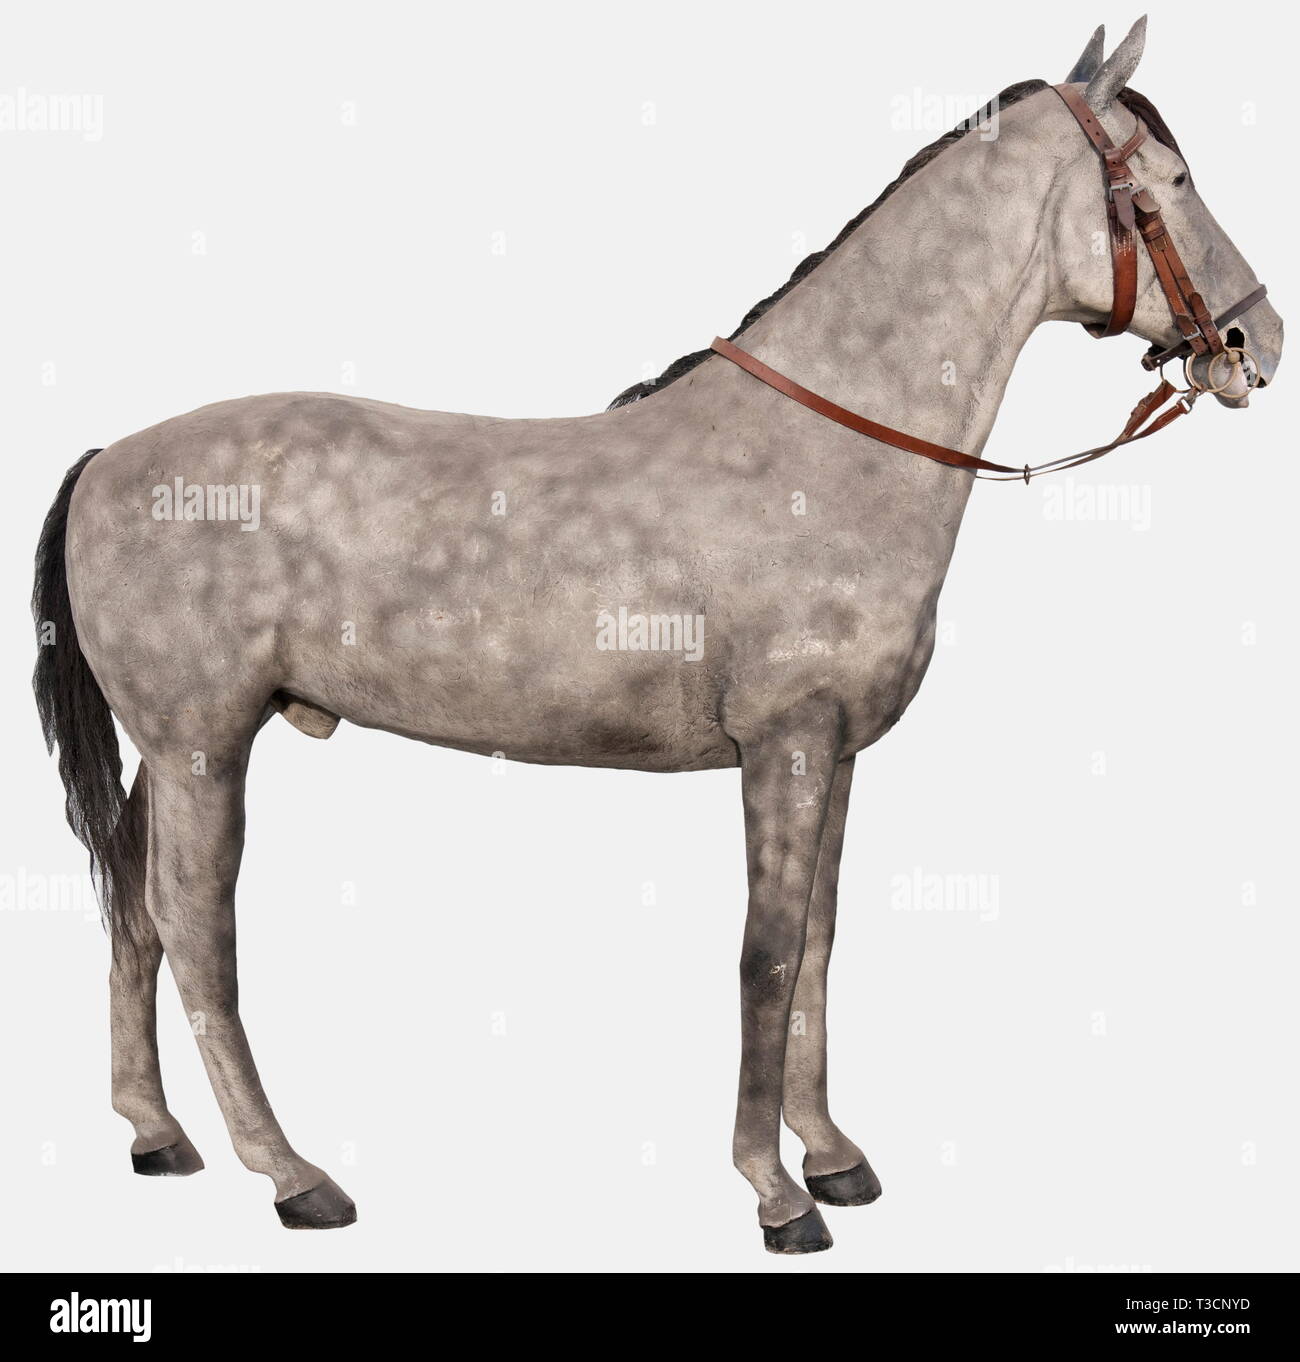 A grey life-size resin horse, with pony tail and mane, and with parts of the leather bridle. Height approx. 2.20 m, length approx. 2.50 m. historic, historical, 20th century, utensil, piece of equipment, utensils, item, items, object, objects, stills, clipping, clippings, cut out, cut-out, cut-outs, Additional-Rights-Clearance-Info-Not-Available Stock Photo